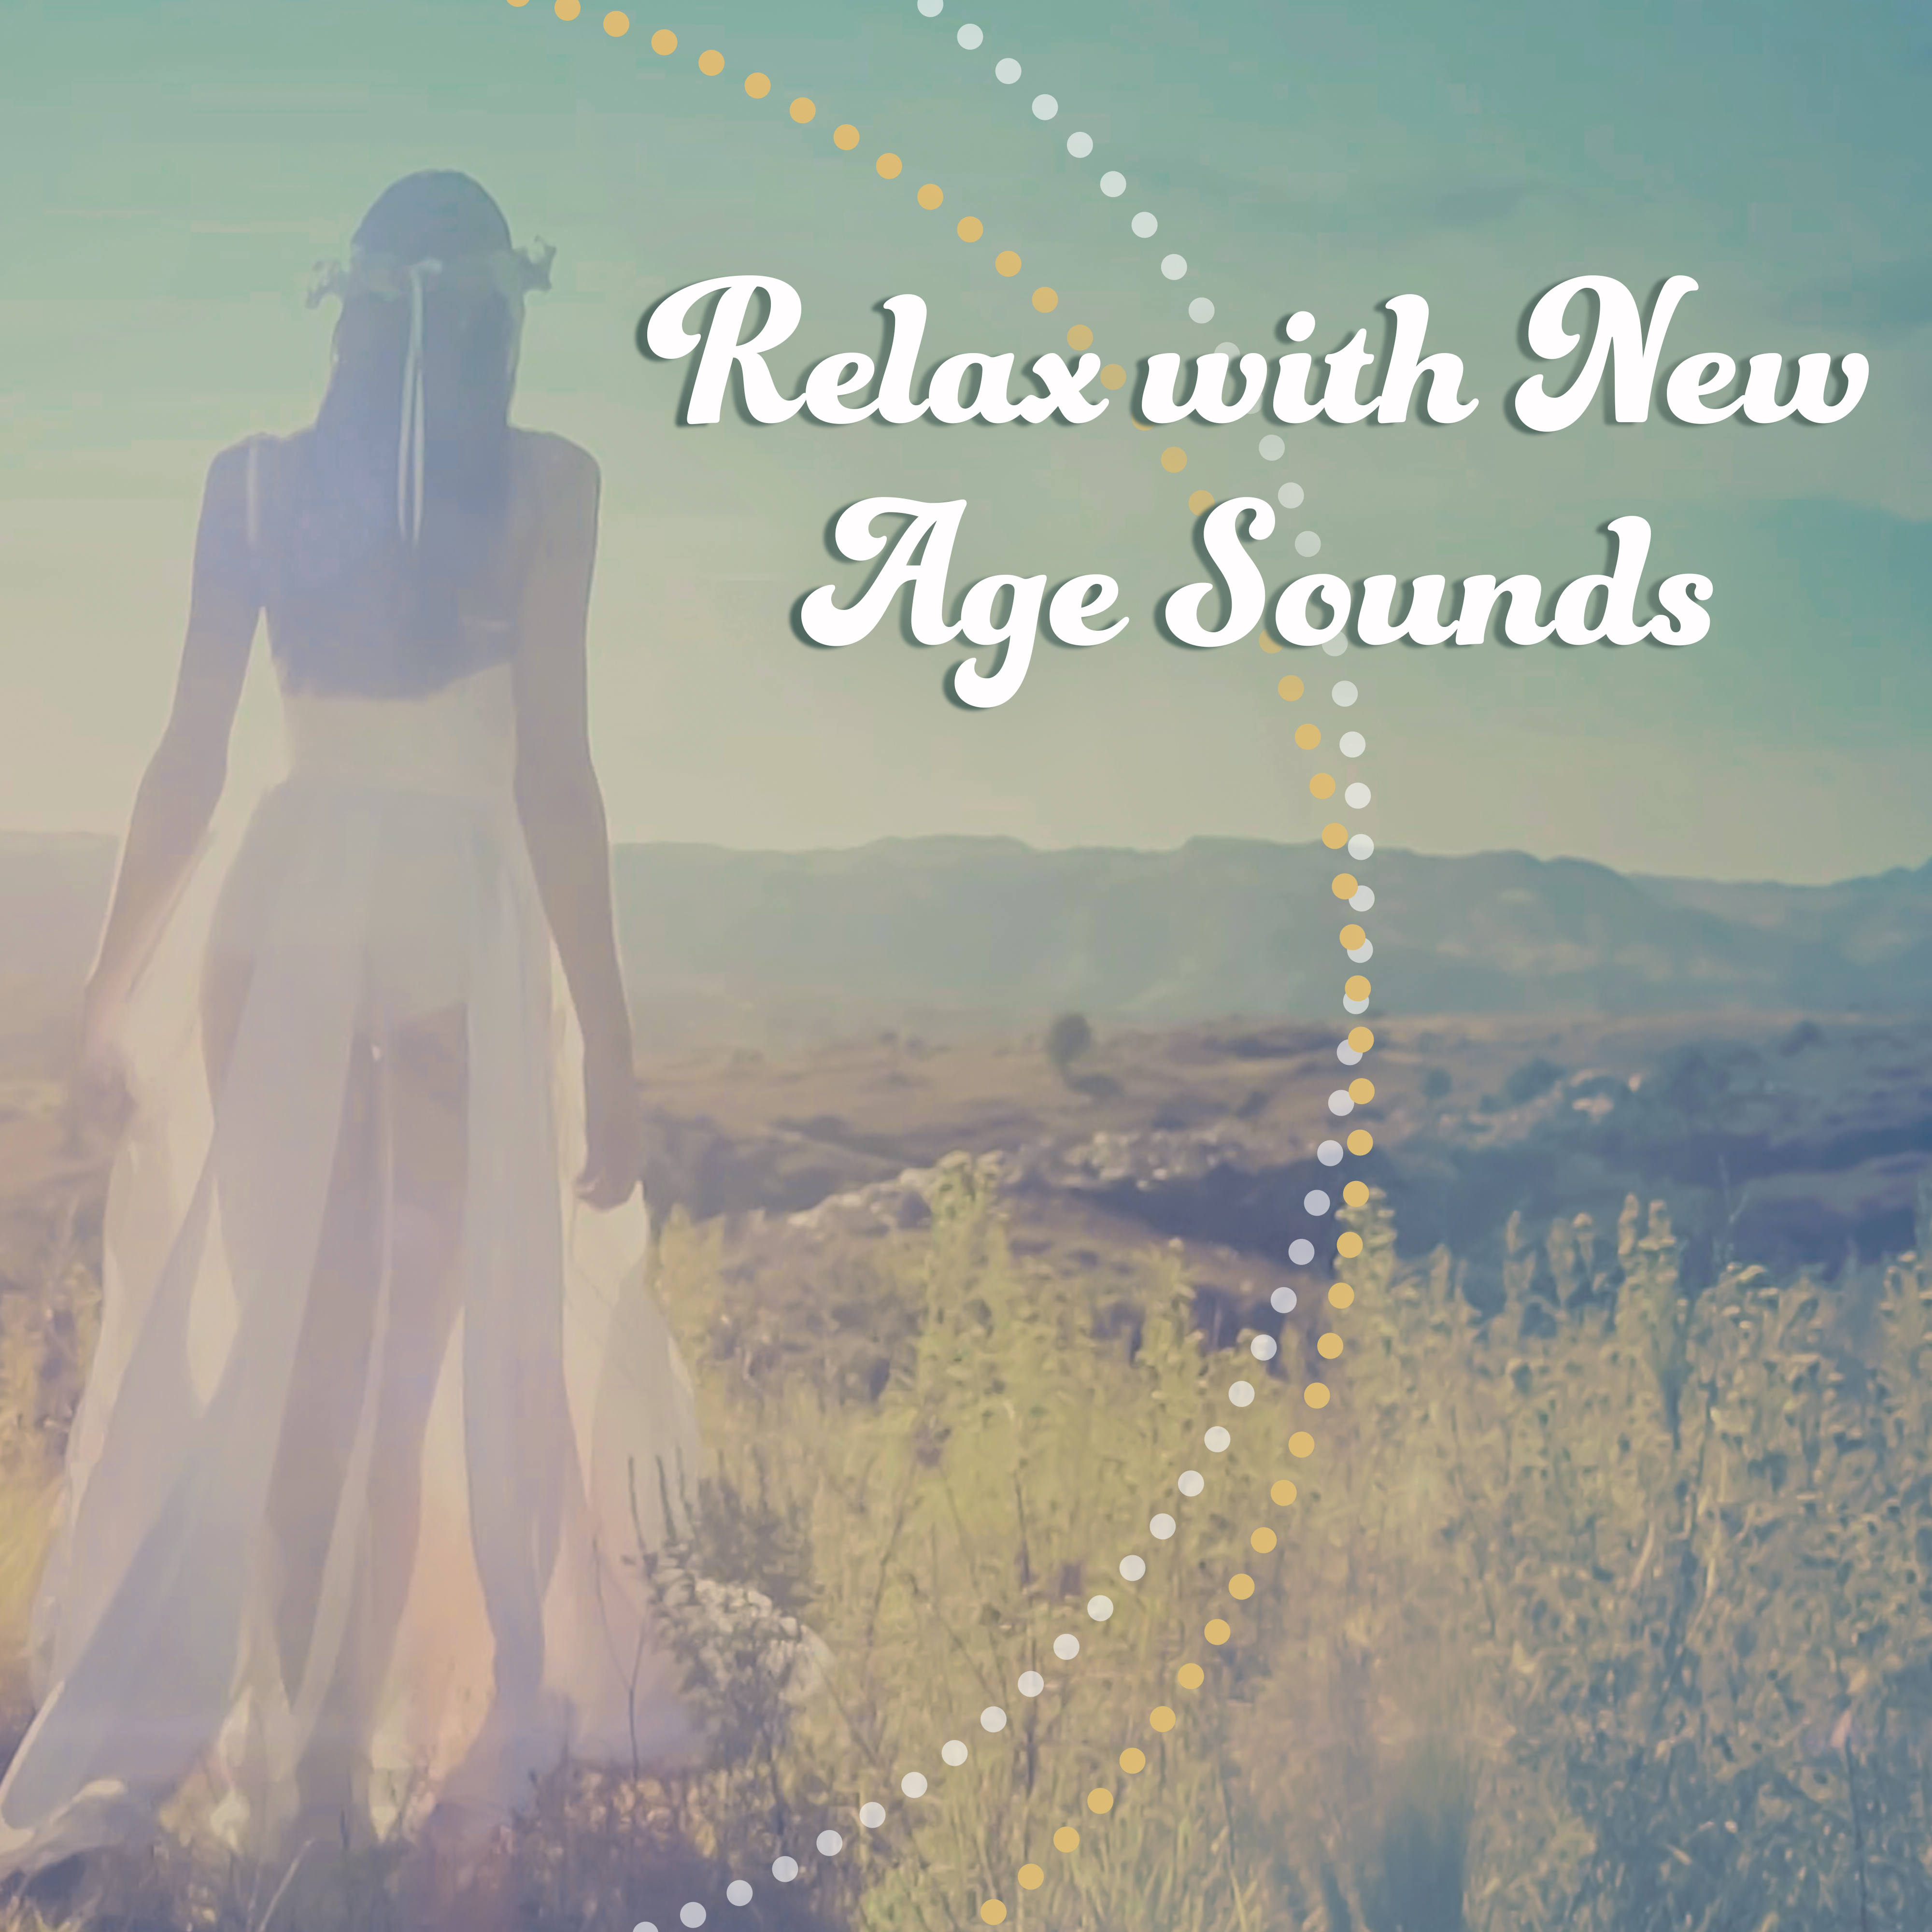 Relax with New Age Sounds  Soothing Sounds, Rest a Bit, Positive Music to Calm Mind, Peaceful Waves